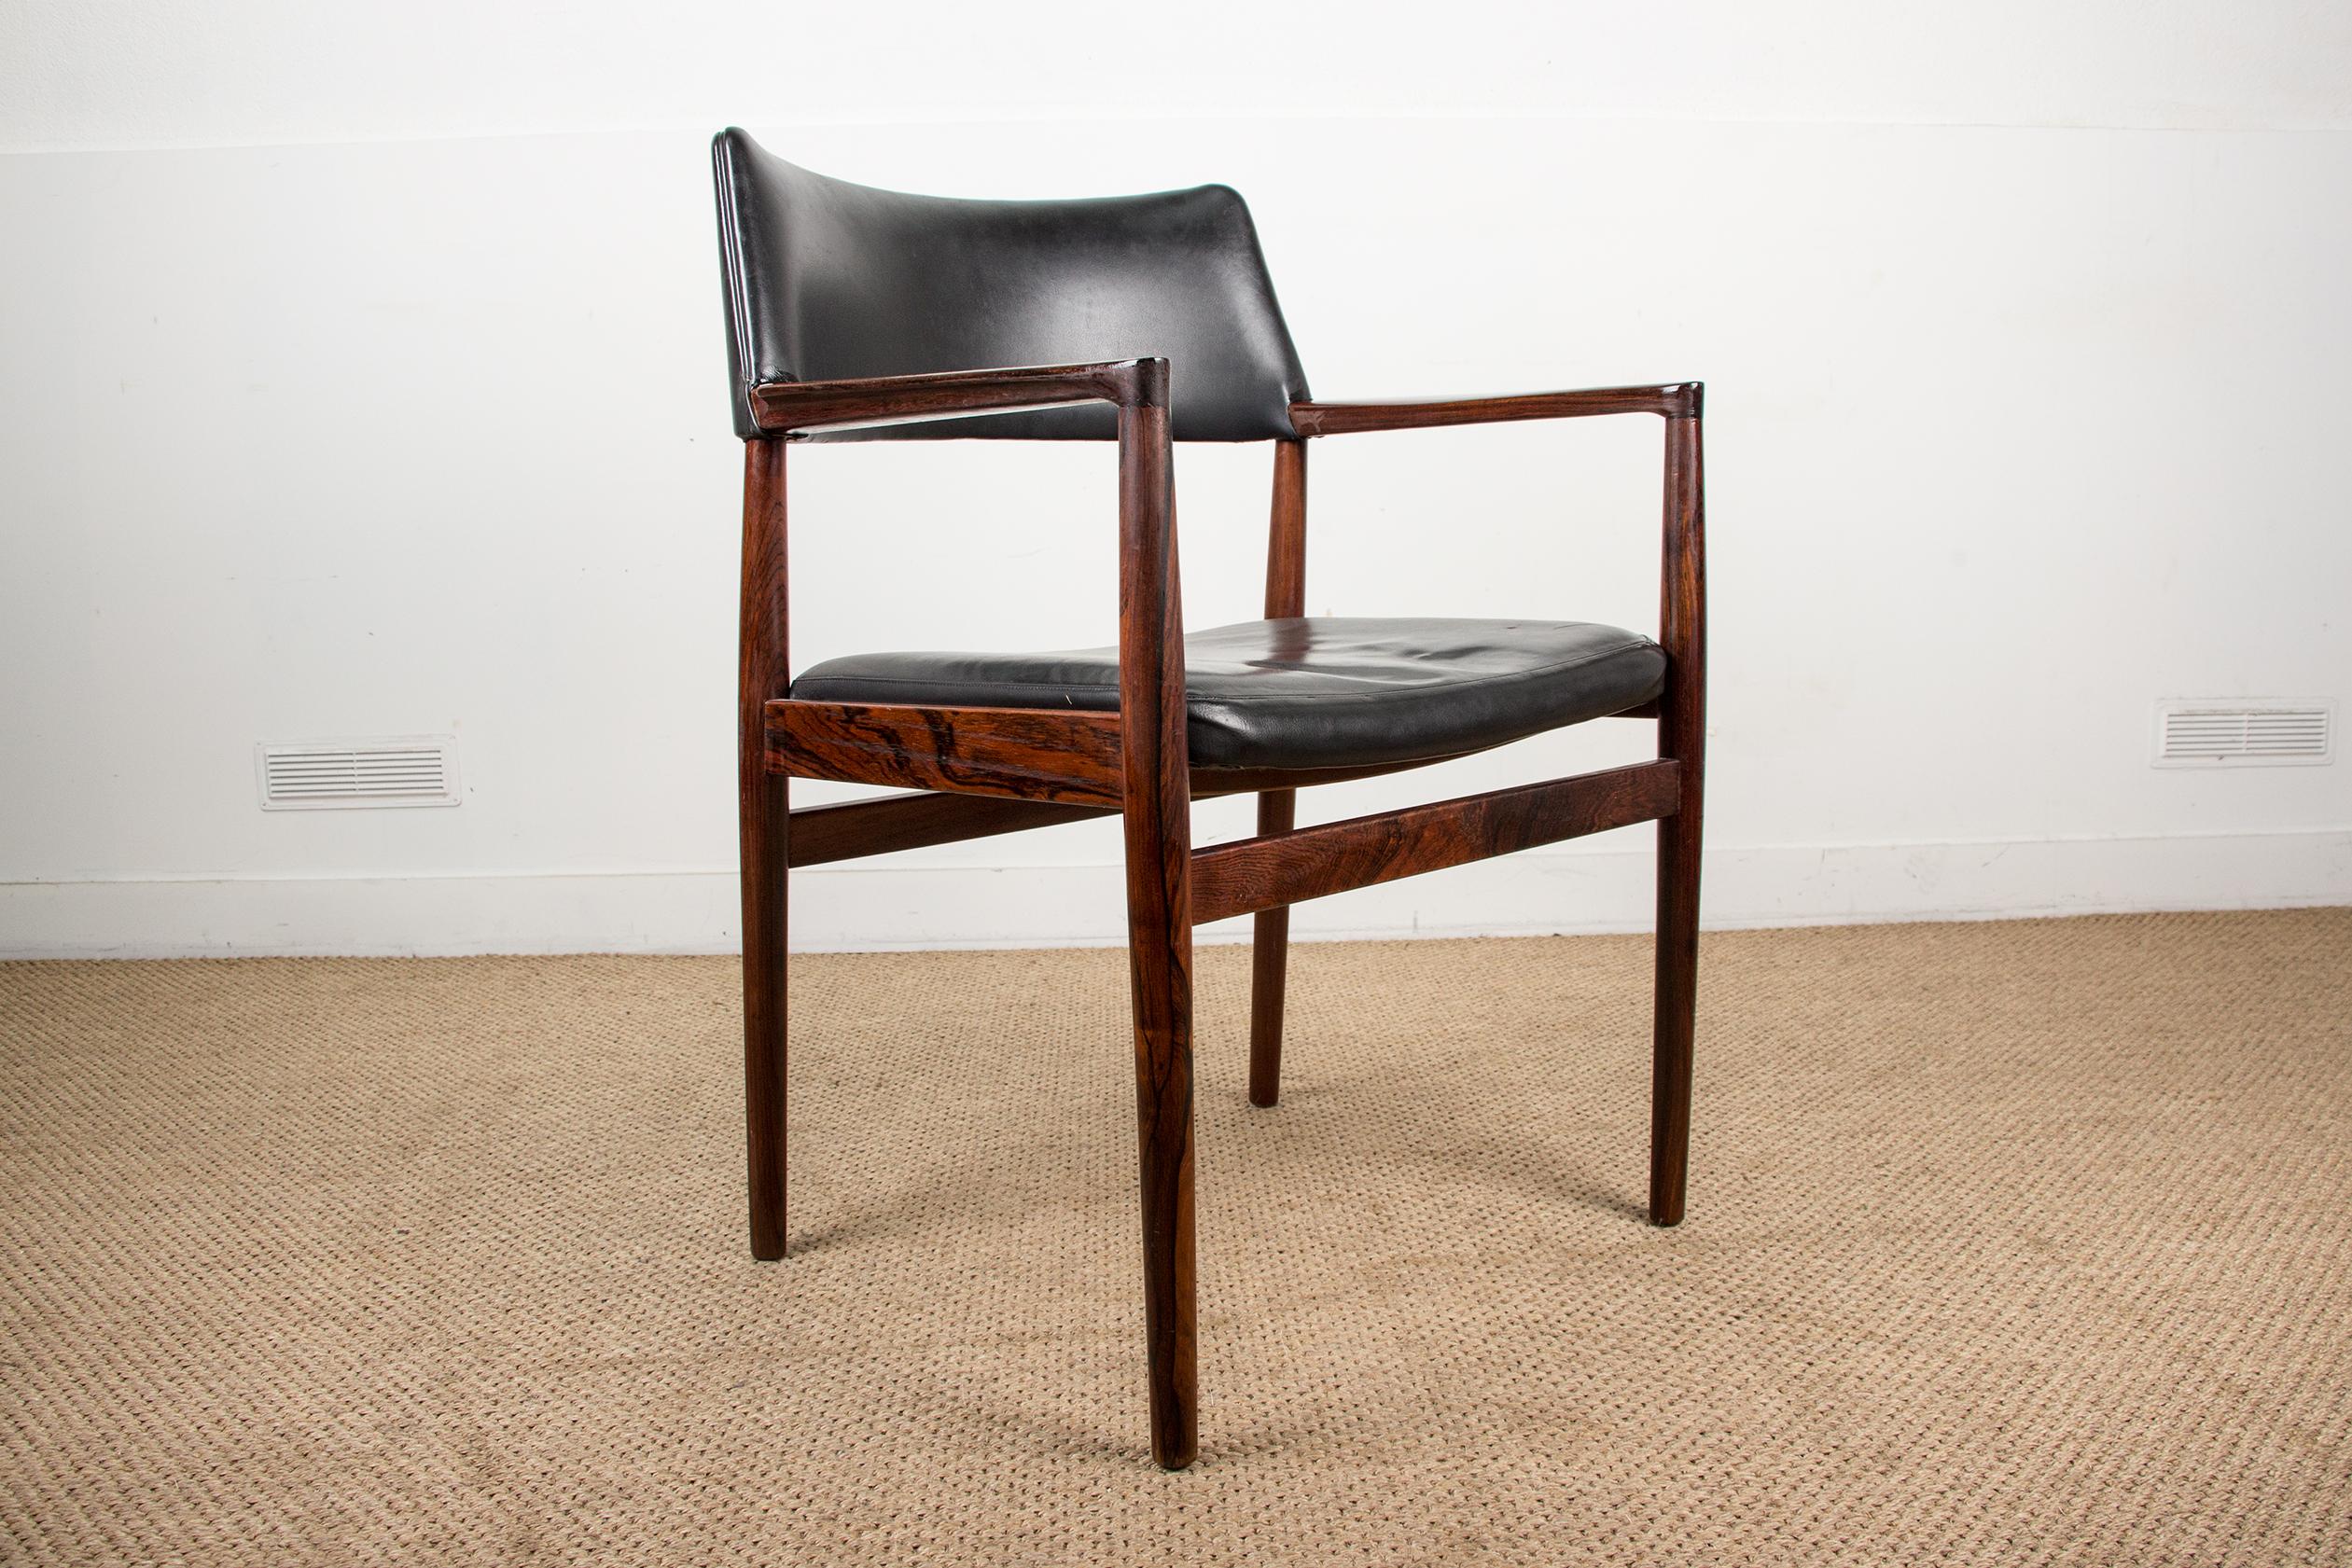 Mid-20th Century Danish Rosewood and Leather Armchair by Erik Wørts for Soro Stolefabrik For Sale